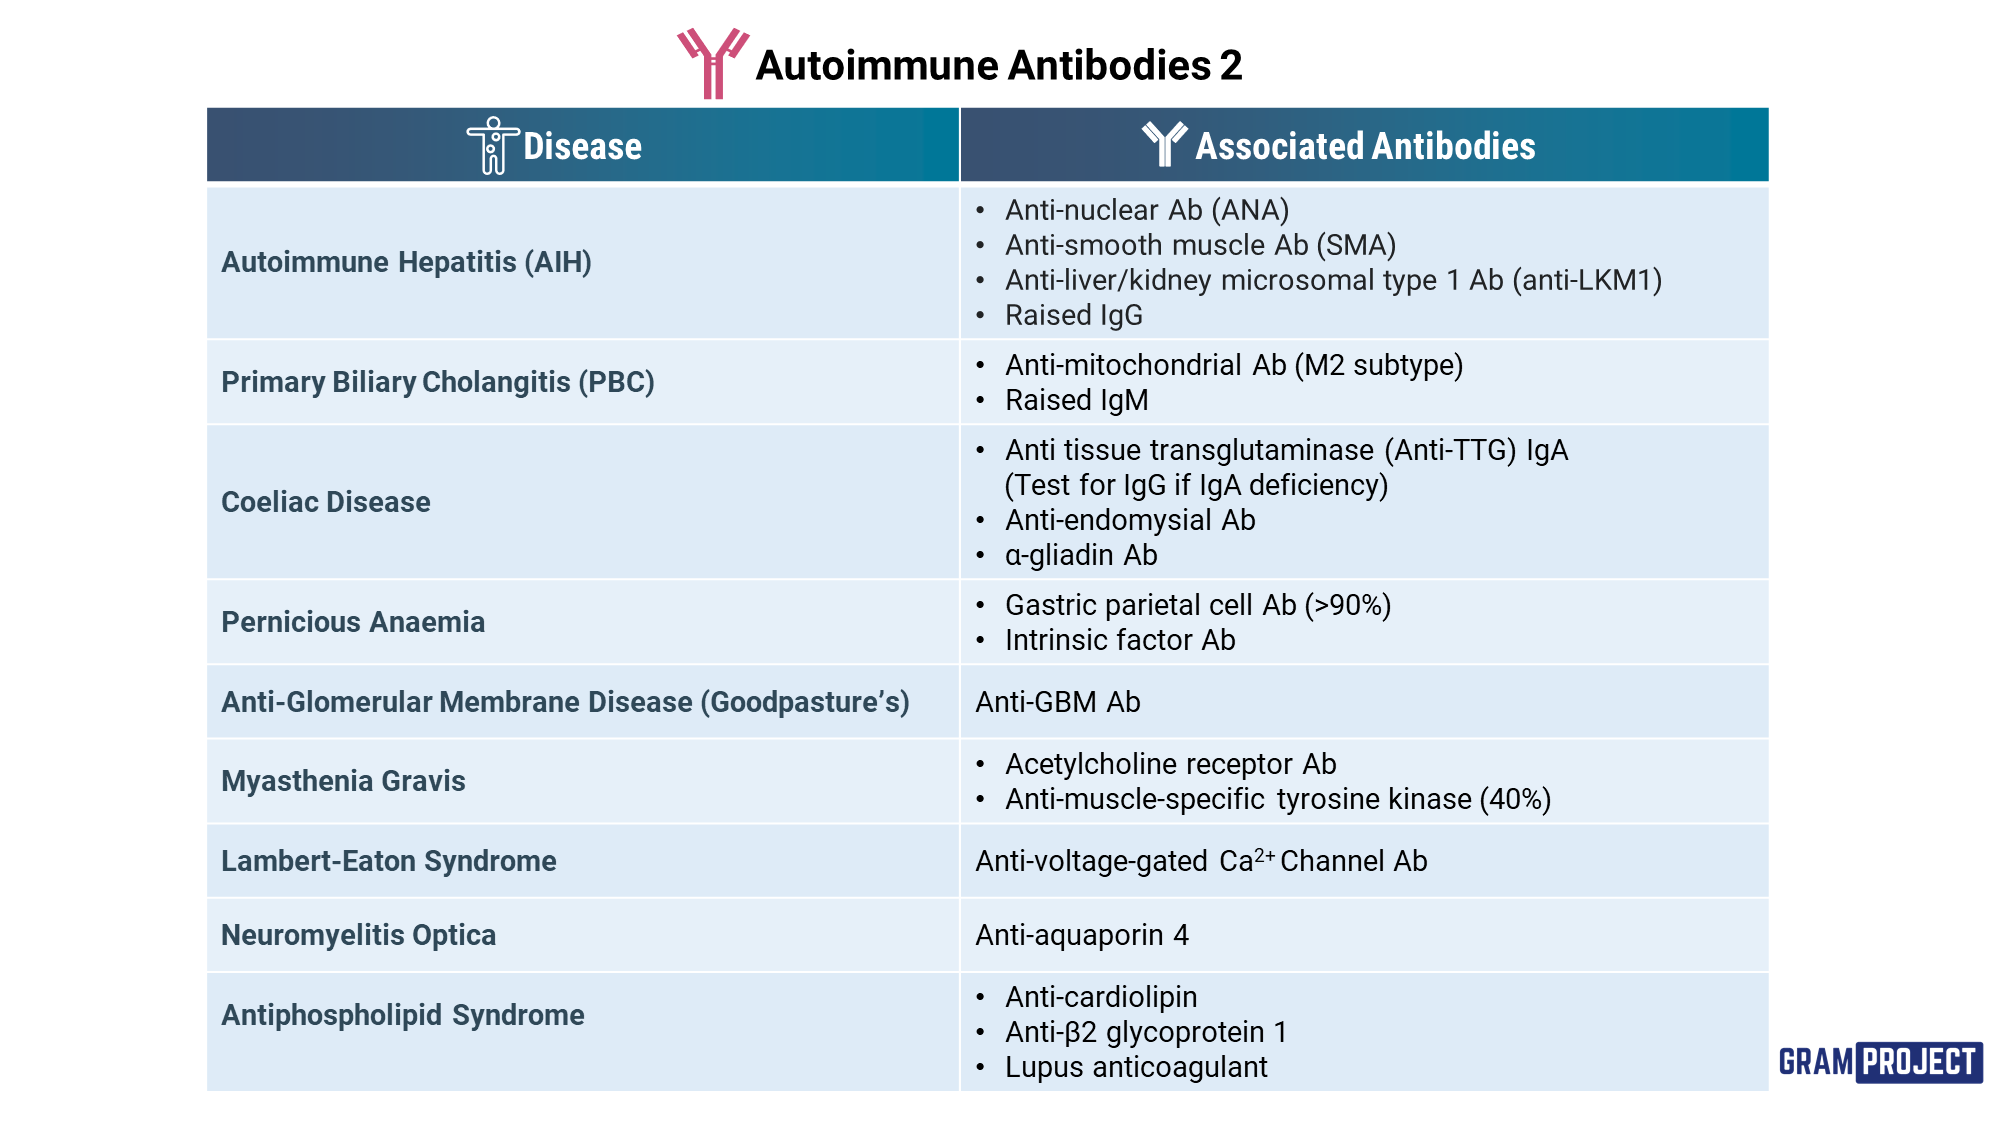 Summary table of common autoimmune diseases and their specific antibodies.